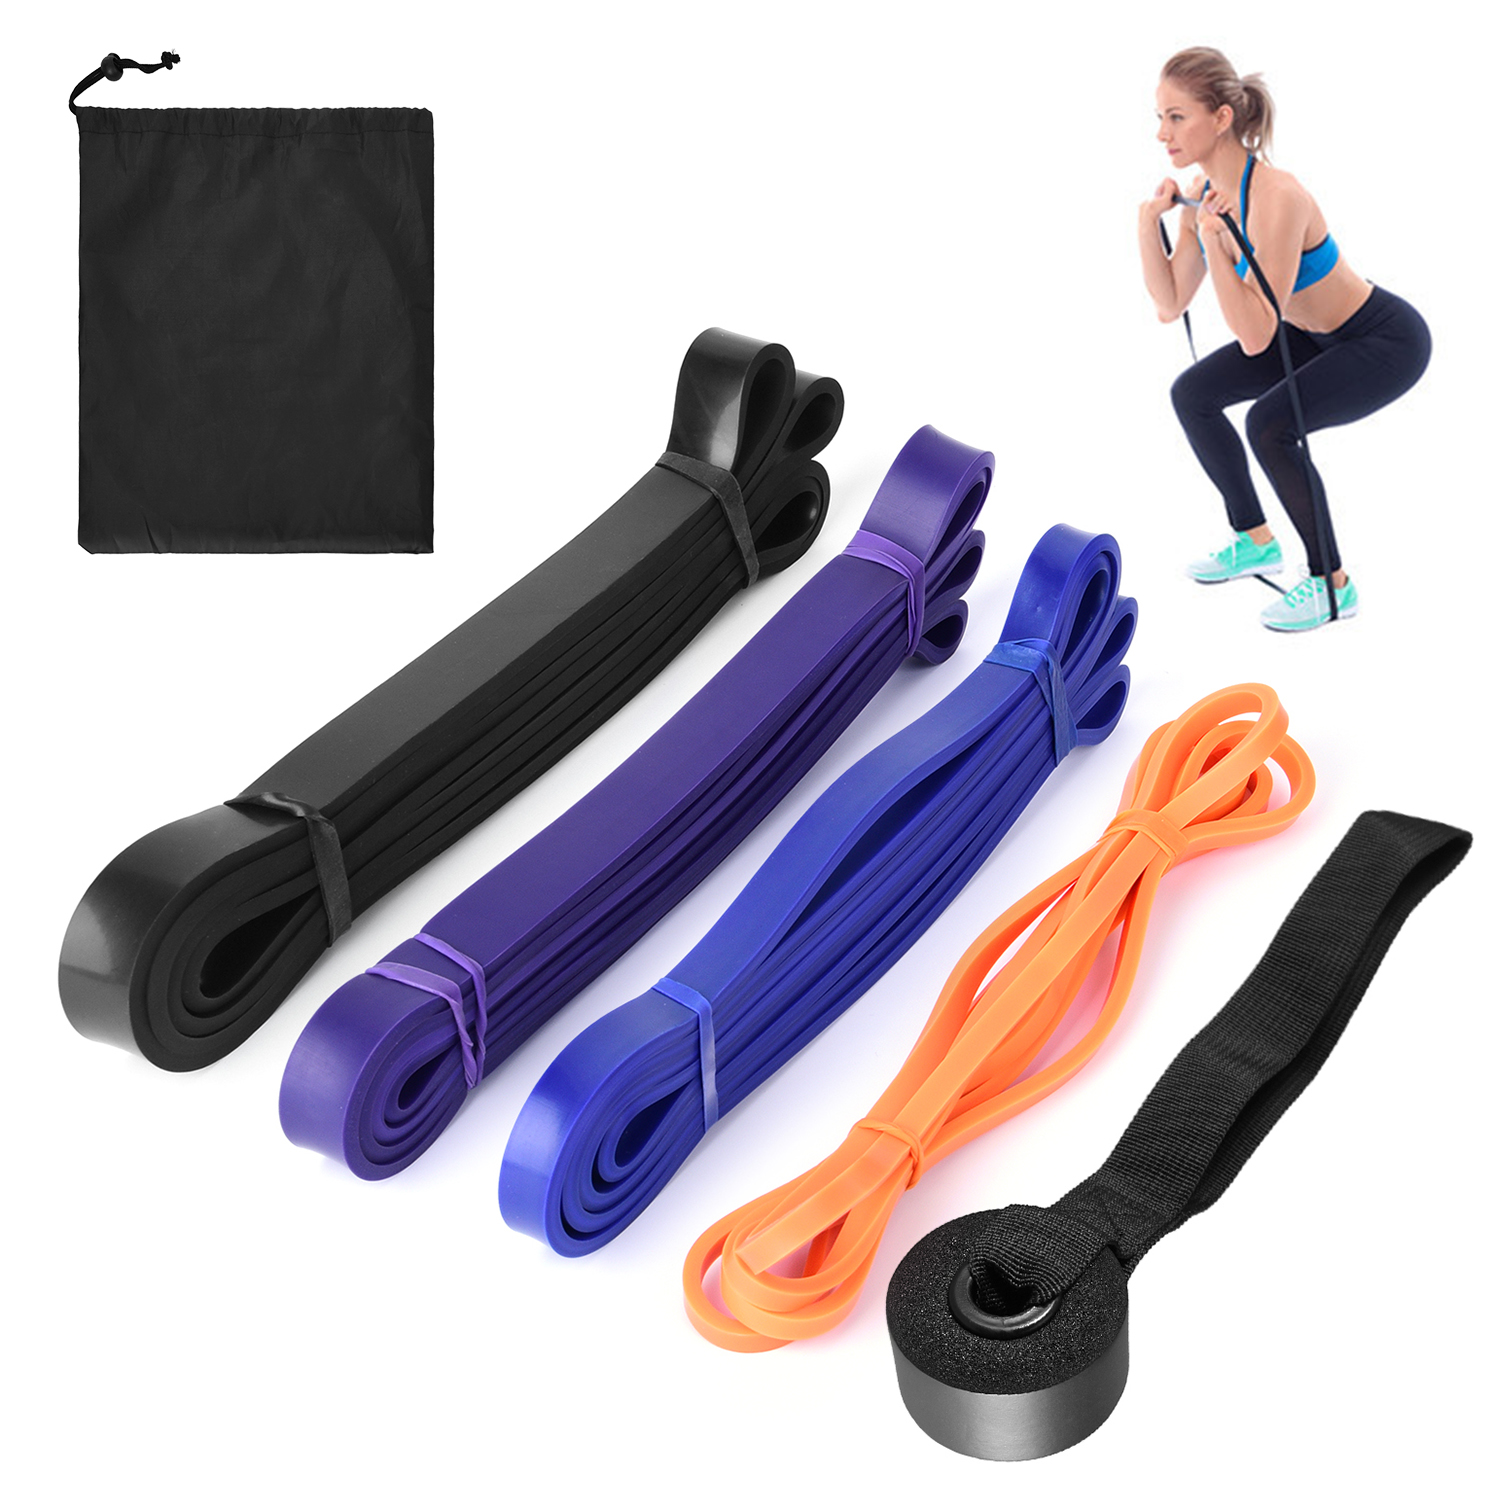 NEW Resistance Bands Natural Latex Loop Pull Up Assist Band Exercise Gym Fitness